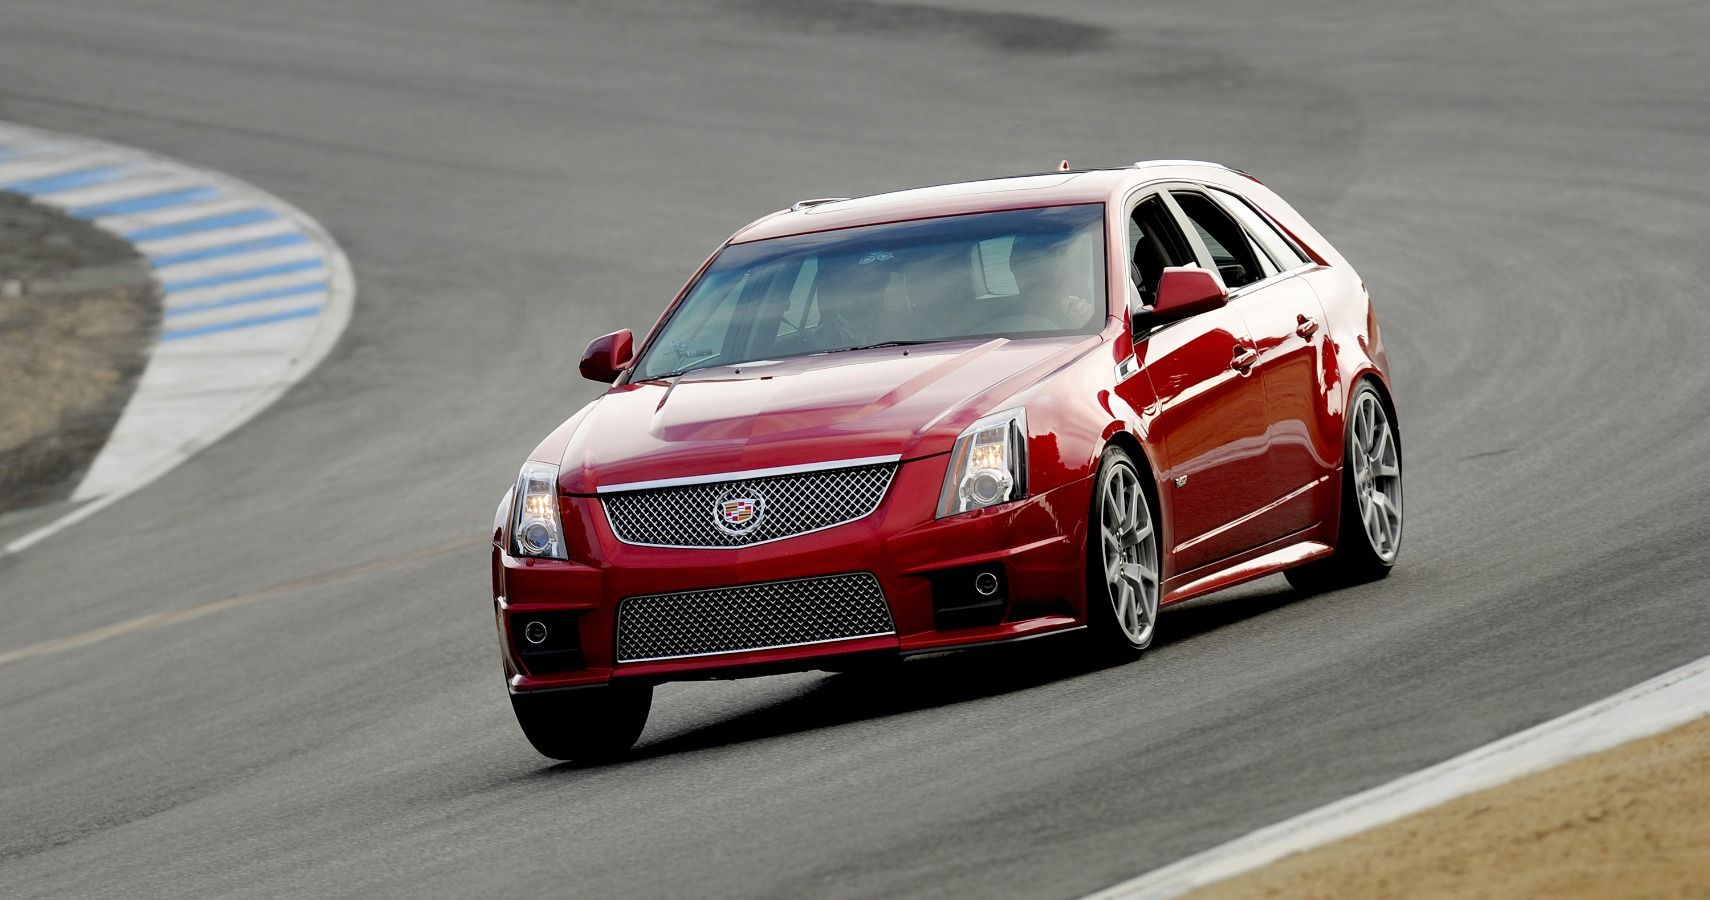 The 556 Hp Cadillac CTS-V Station Wagon on the track. 